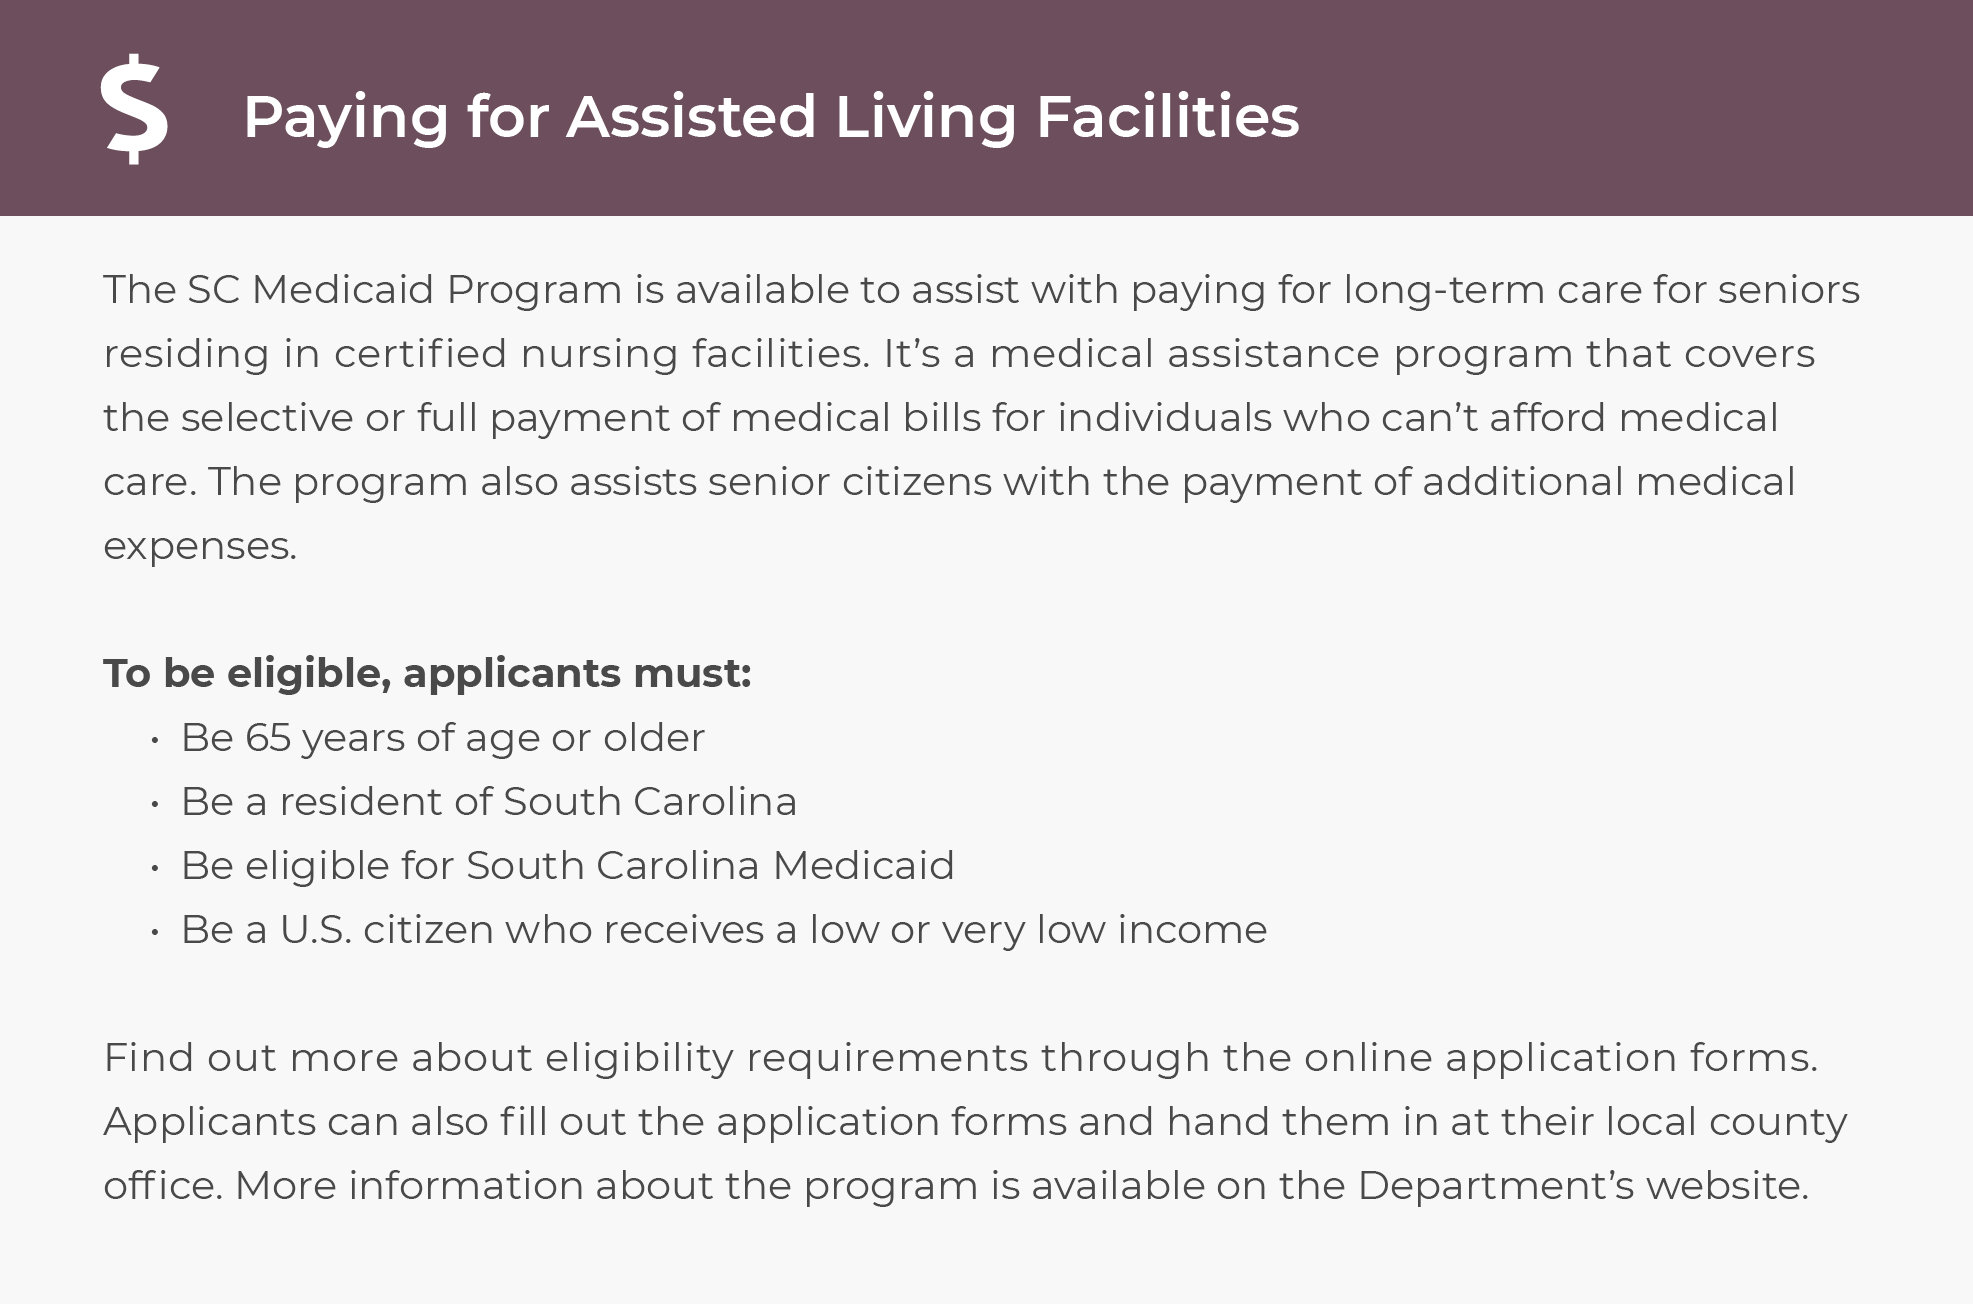 More ways to pay for assisted living in South Carolina